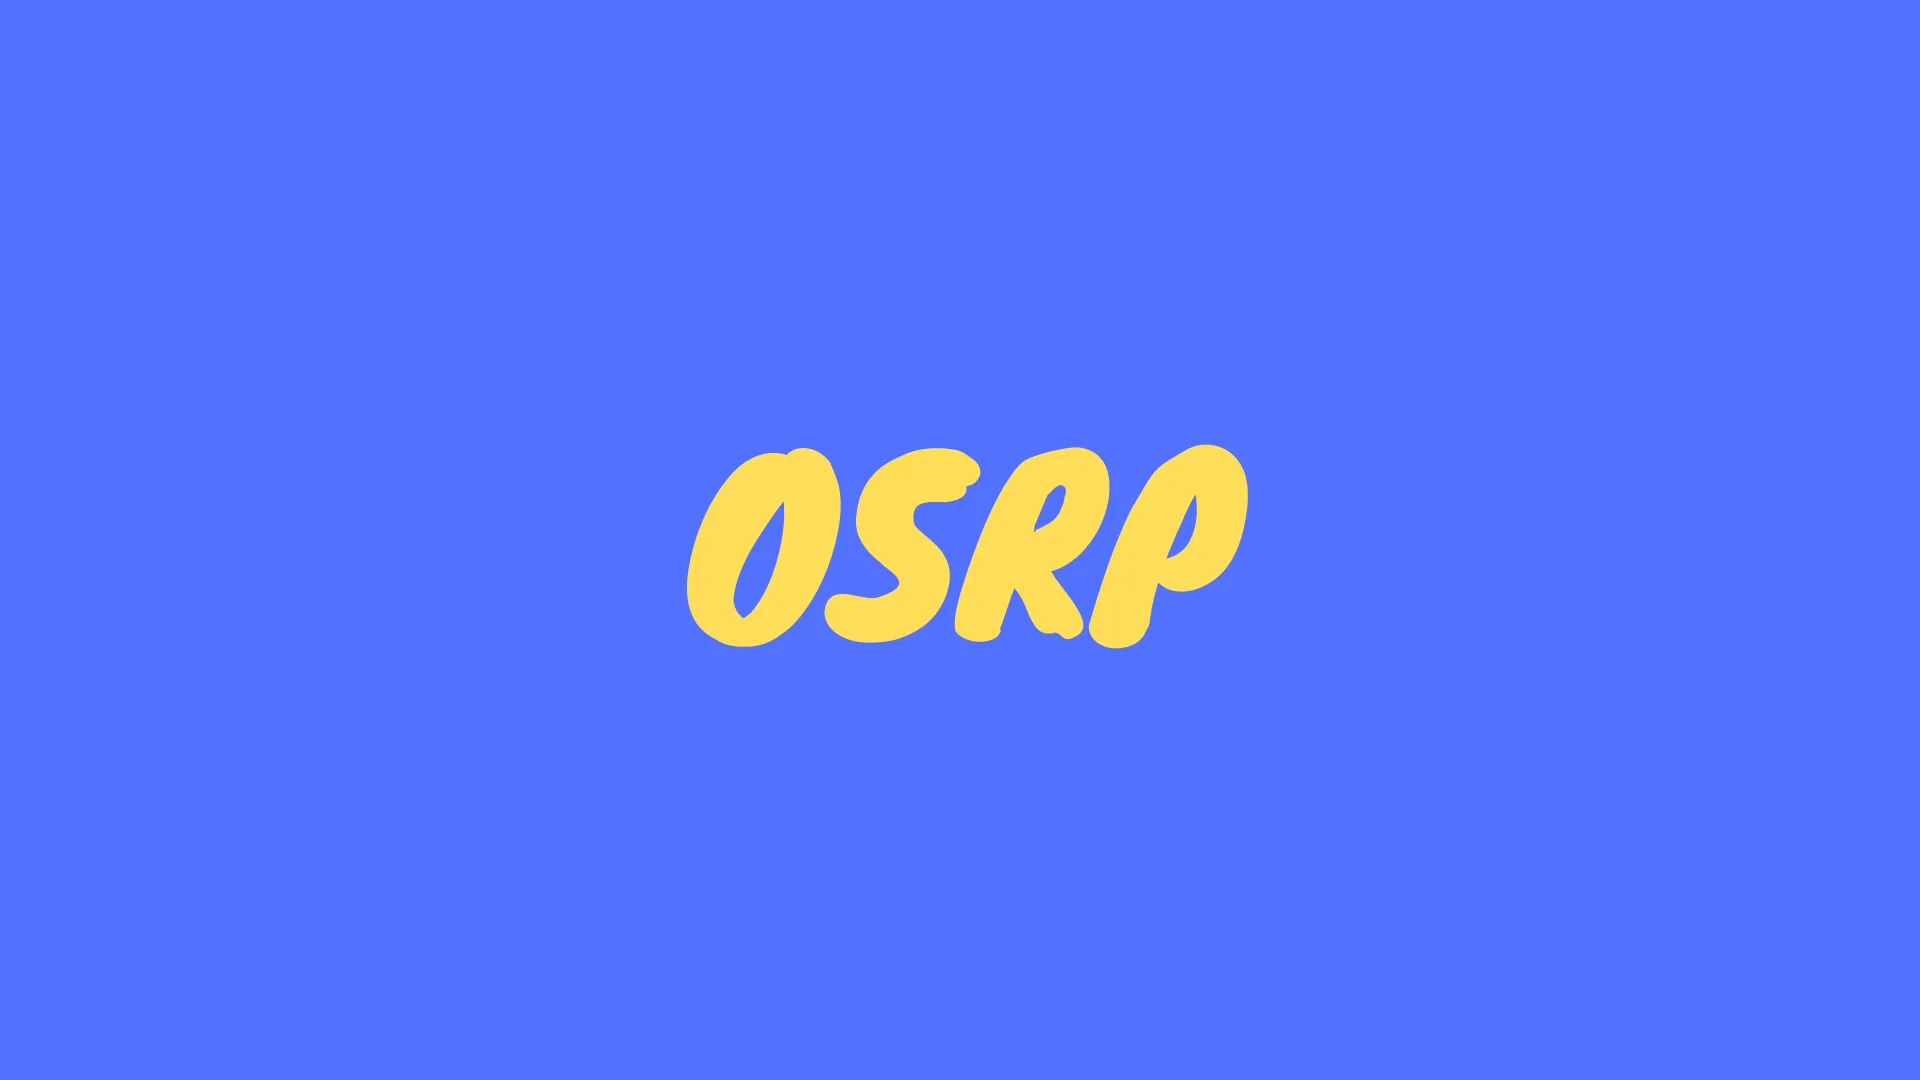 A picture with a Blue background with yellow font spelling out &ldquo;OSRP&rdquo;